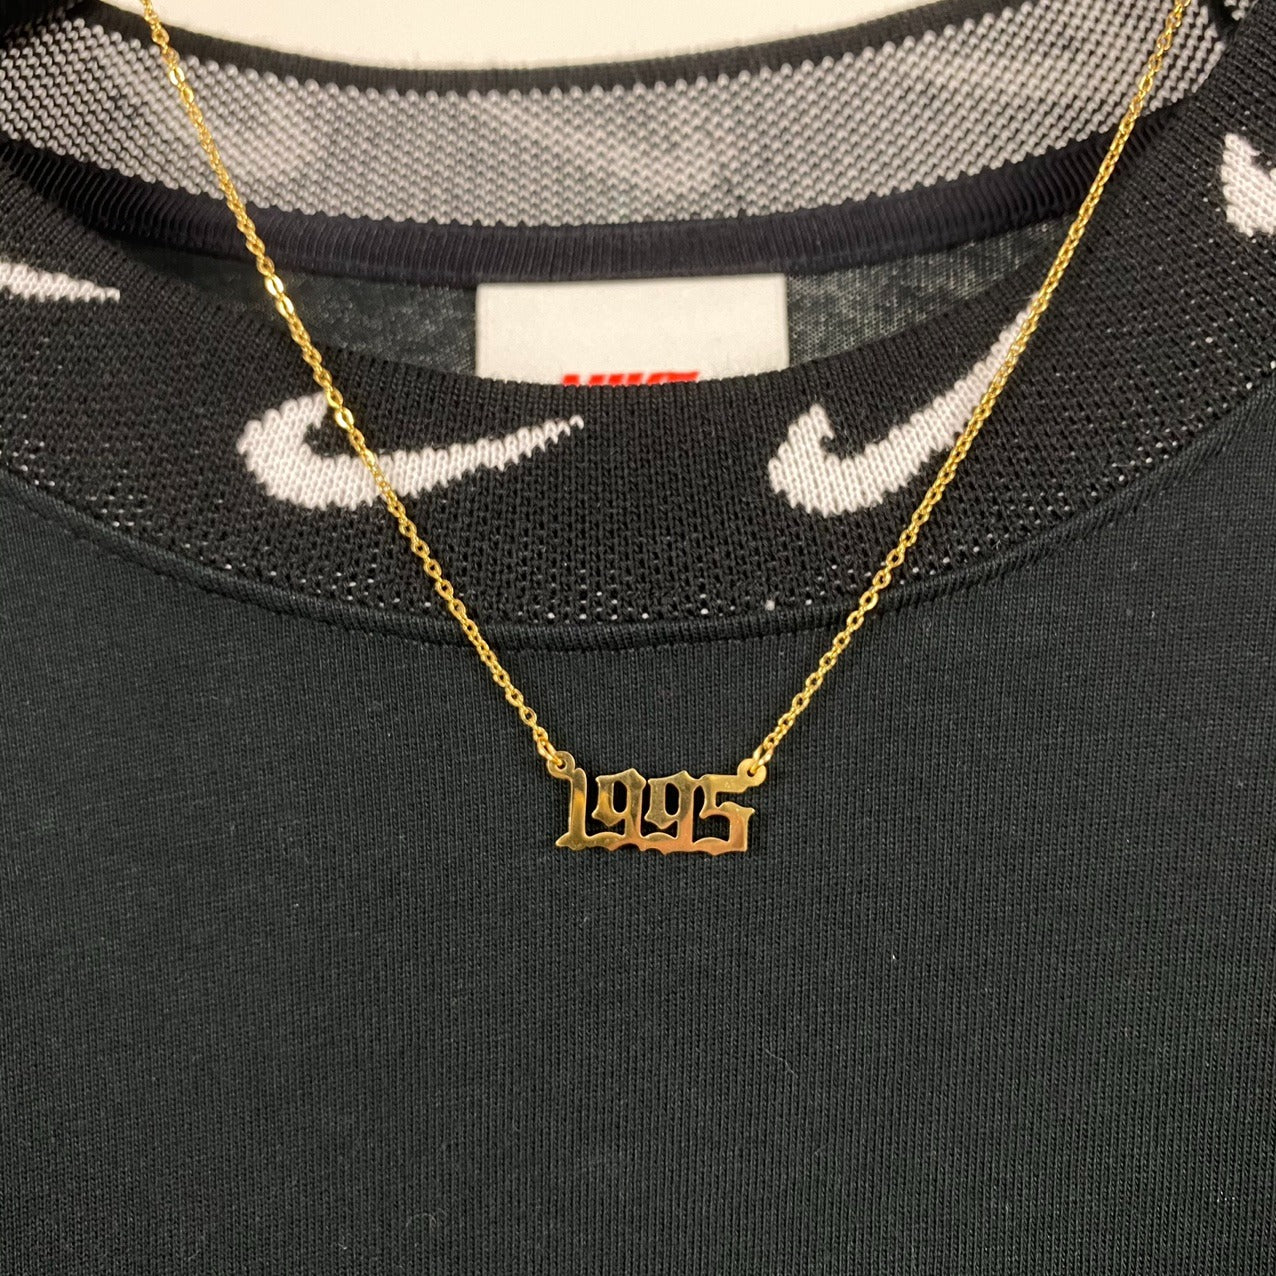 1995 Birth Year Necklace Chain Gold